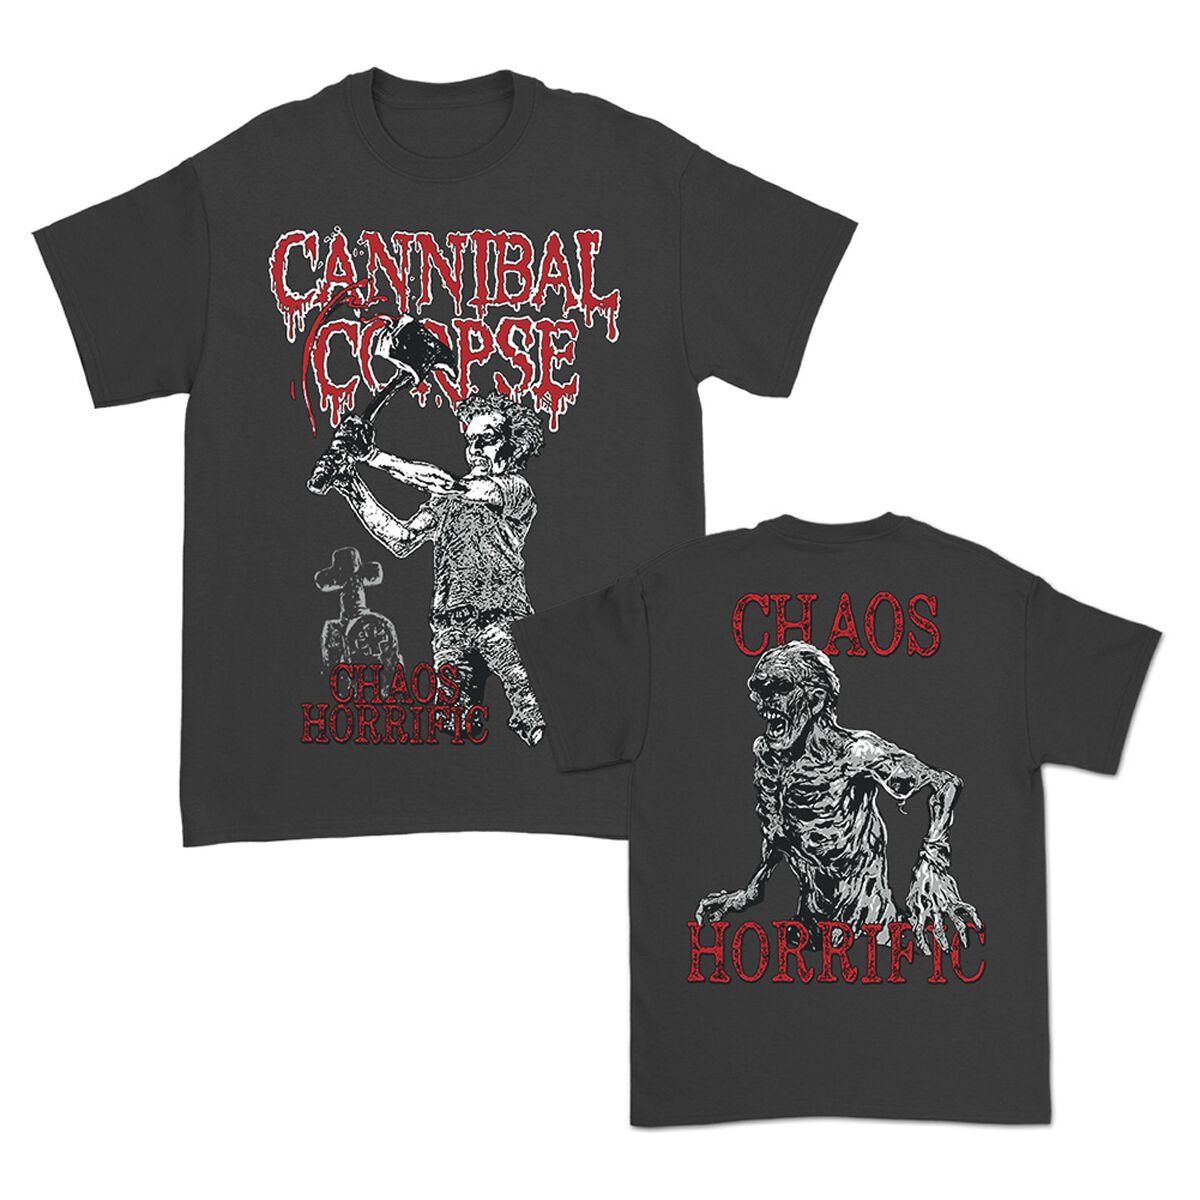 Cannibal Corpse Chaos Horrific Bootleg T-Shirt charcoal in M von Cannibal Corpse